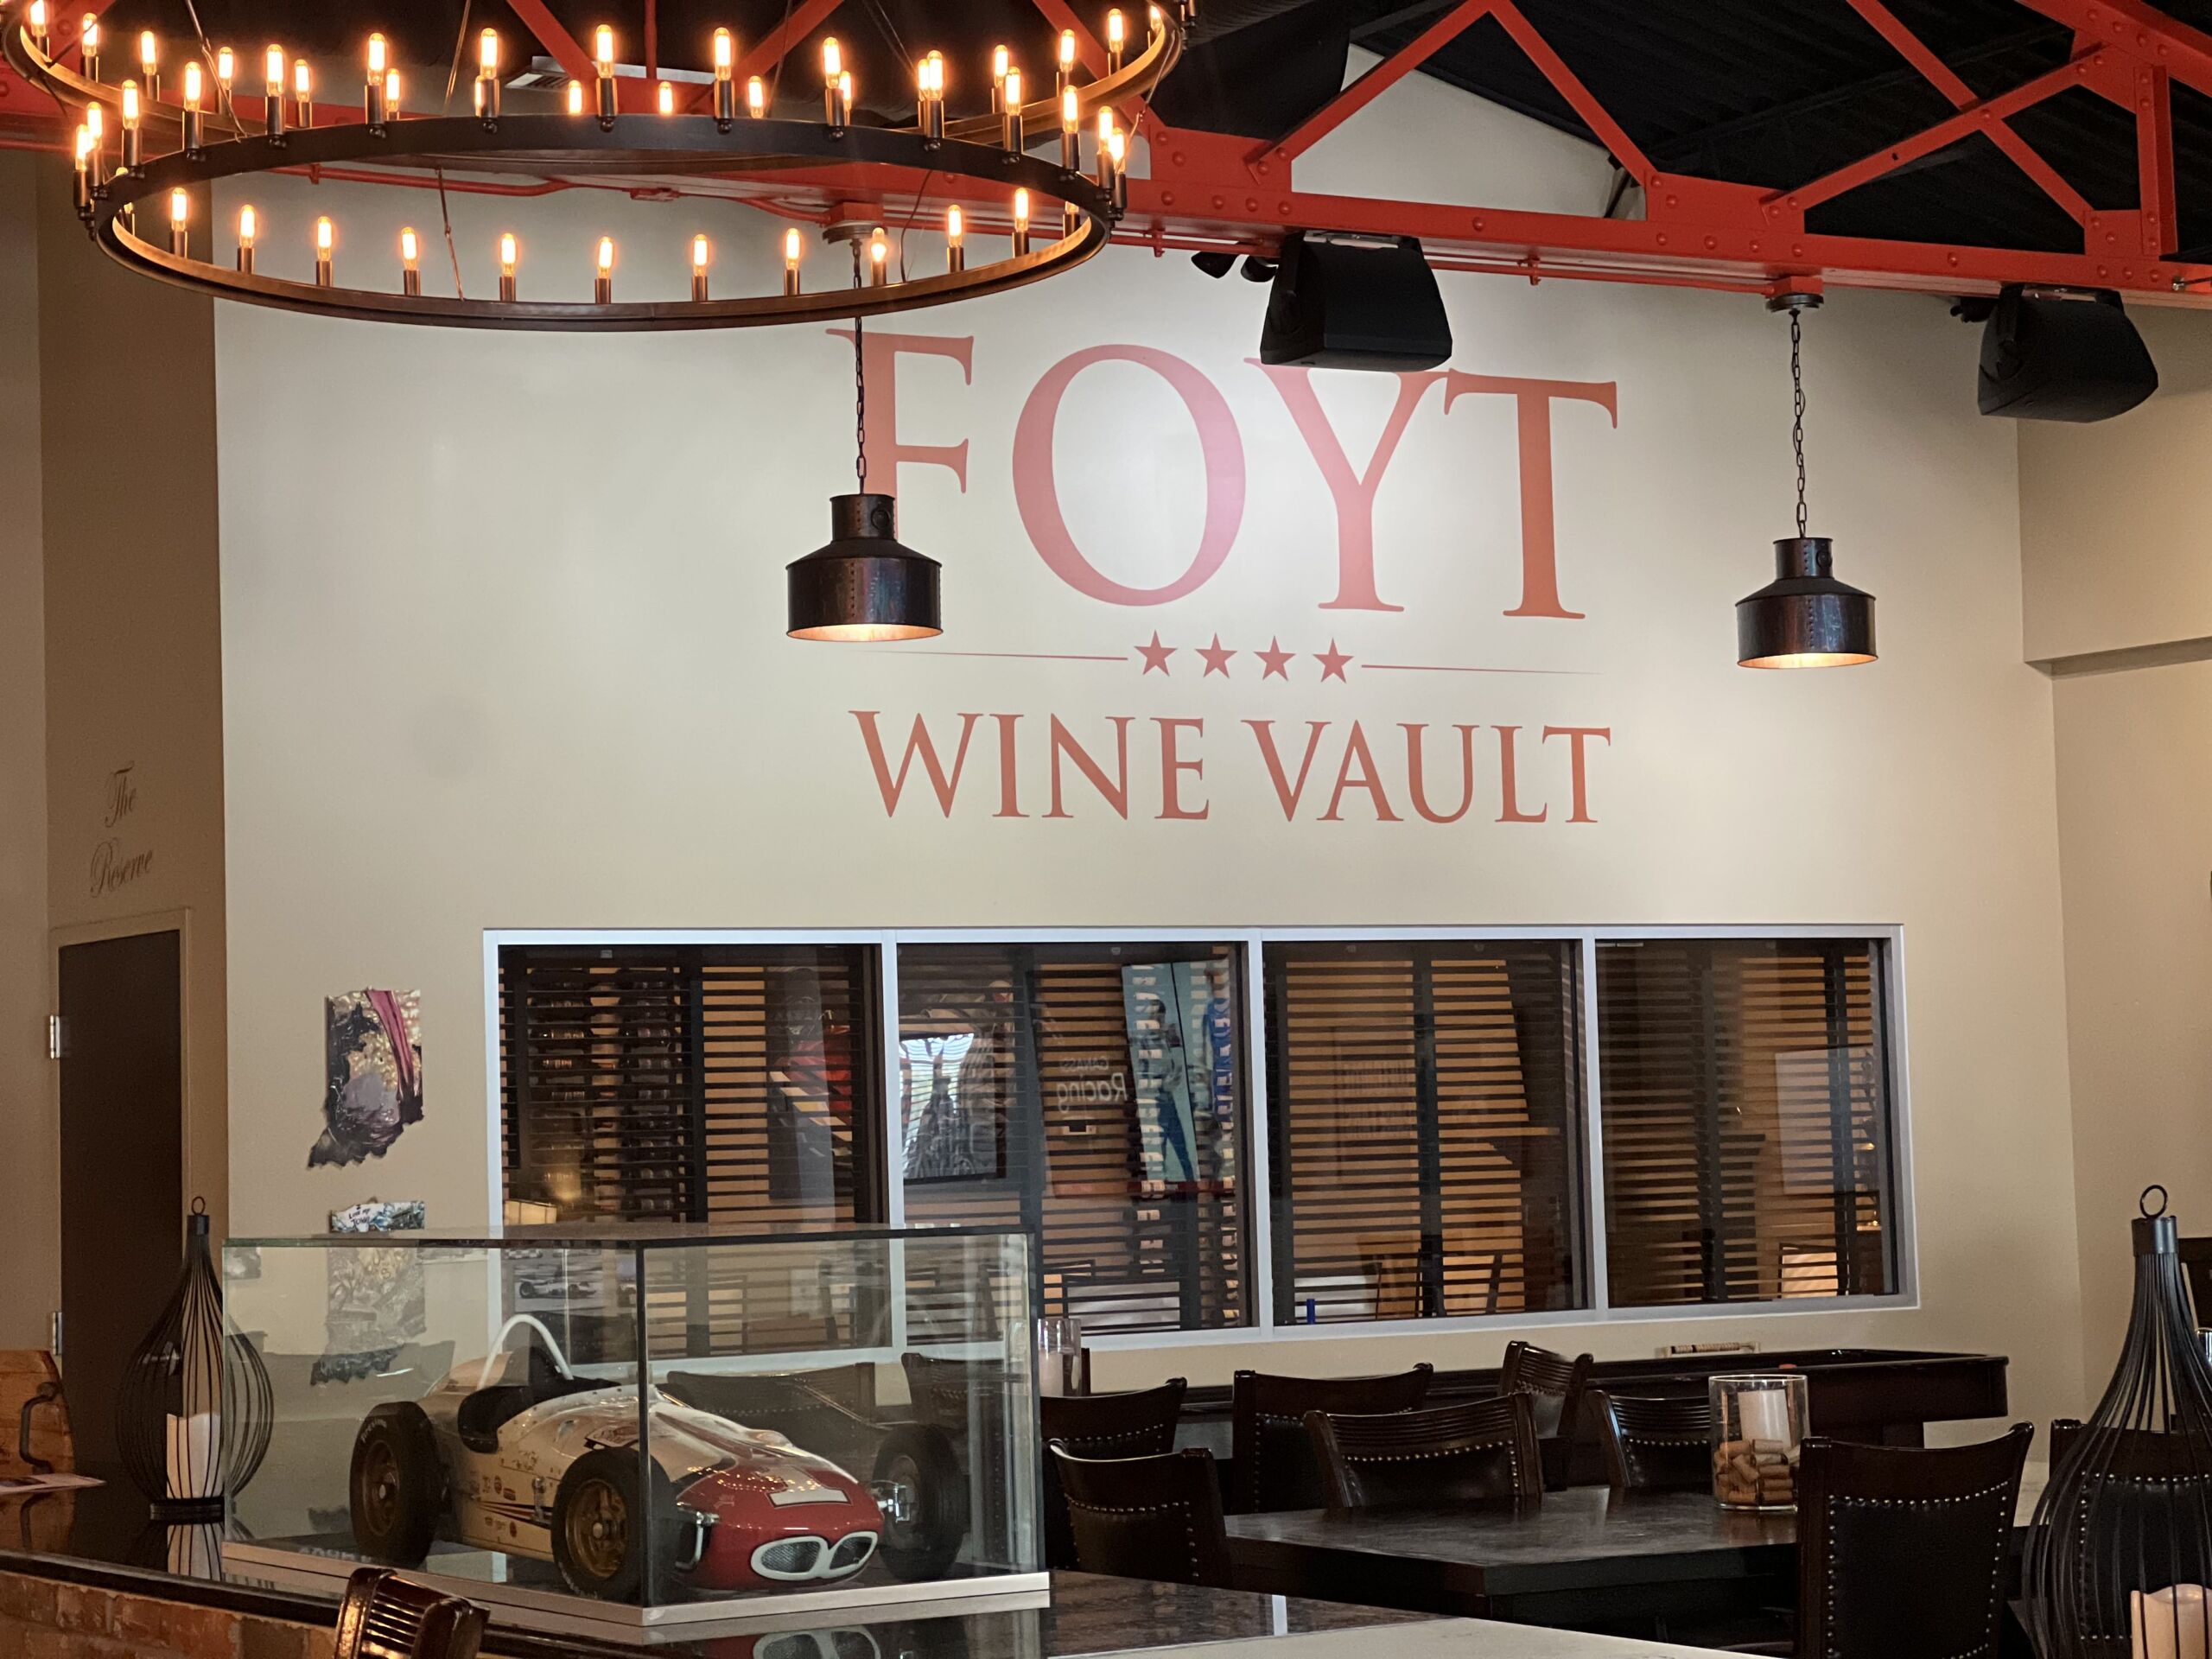 Outside sign of Foyt Wine Vault. Photo provided by Foyt Wine Vault